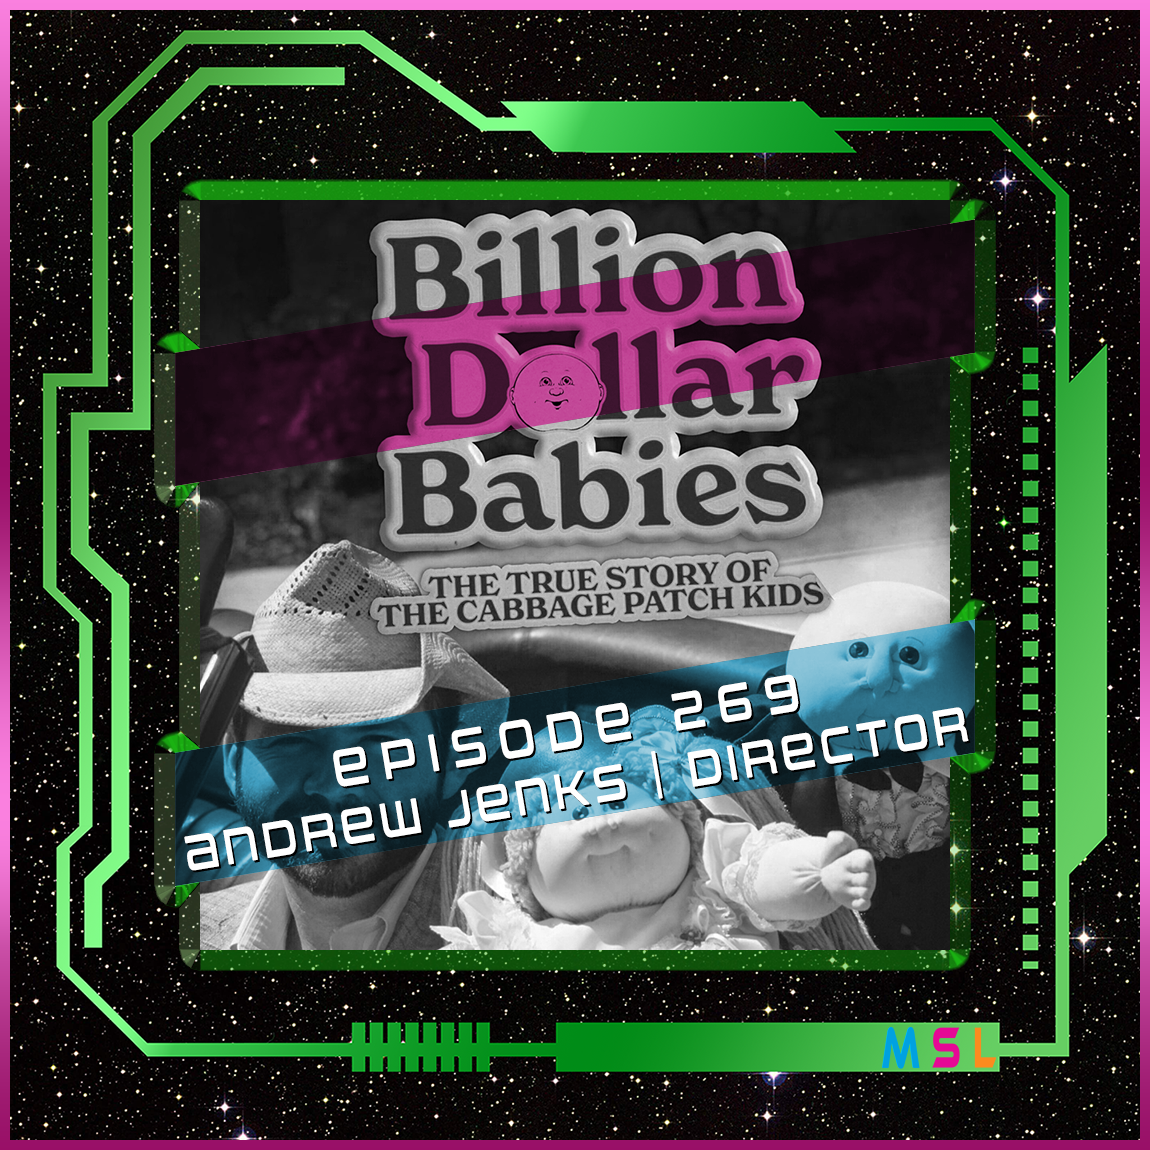 269 | Andrew Jenks (Billion Dollar Babies: The True Story of the Cabbage Patch Kids)